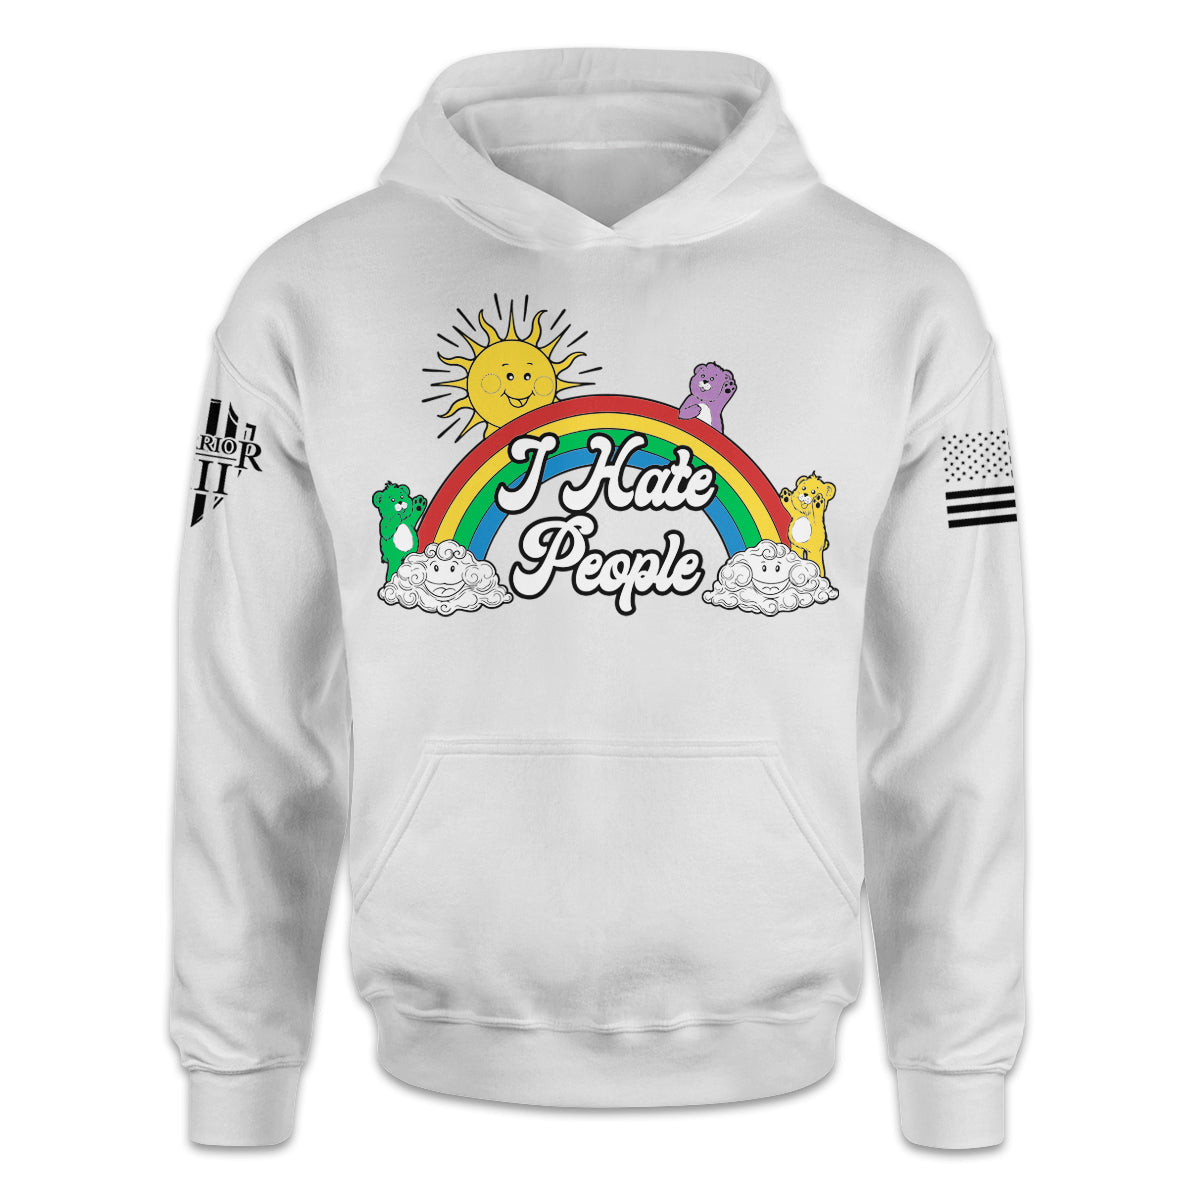 A white hoodie with the words "I Hate People" with bears, rainbow and clouds printed on the front of the shirt.